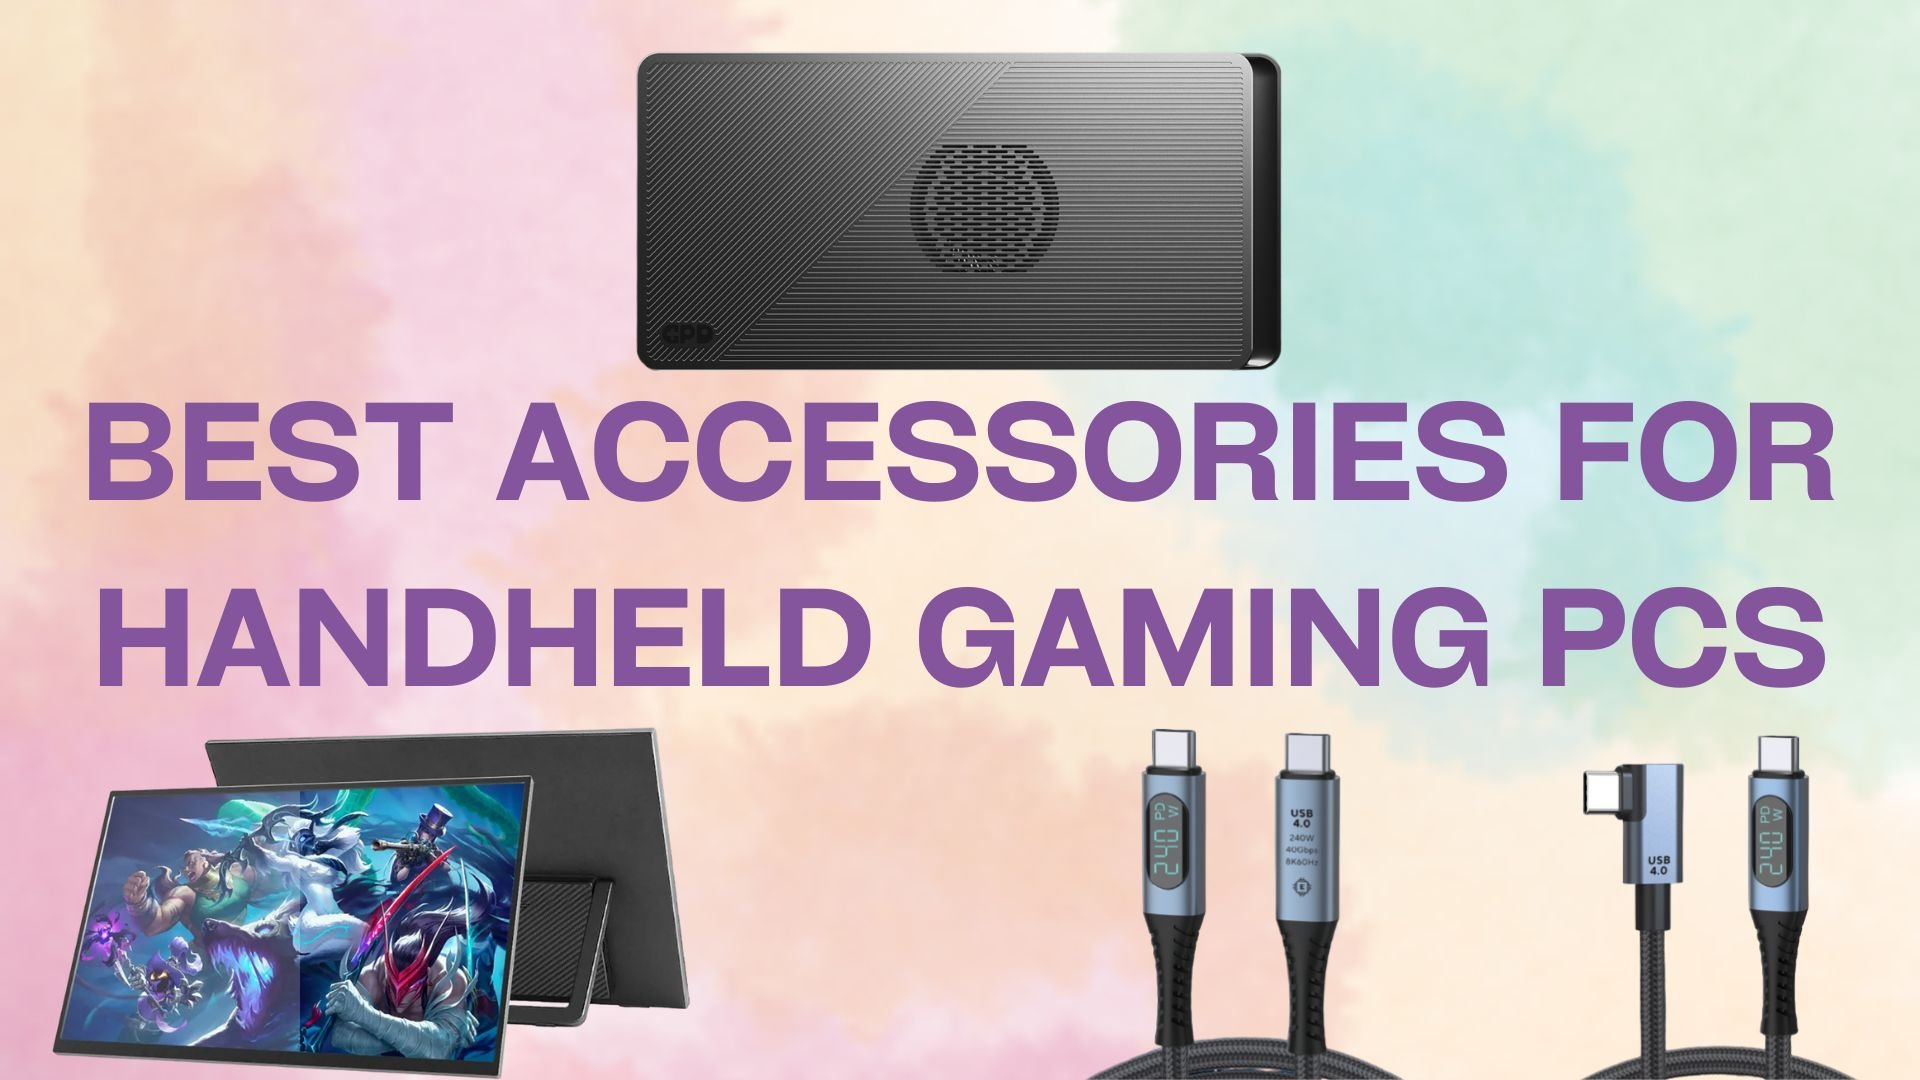 Best Accessories for Handheld Gaming PCs